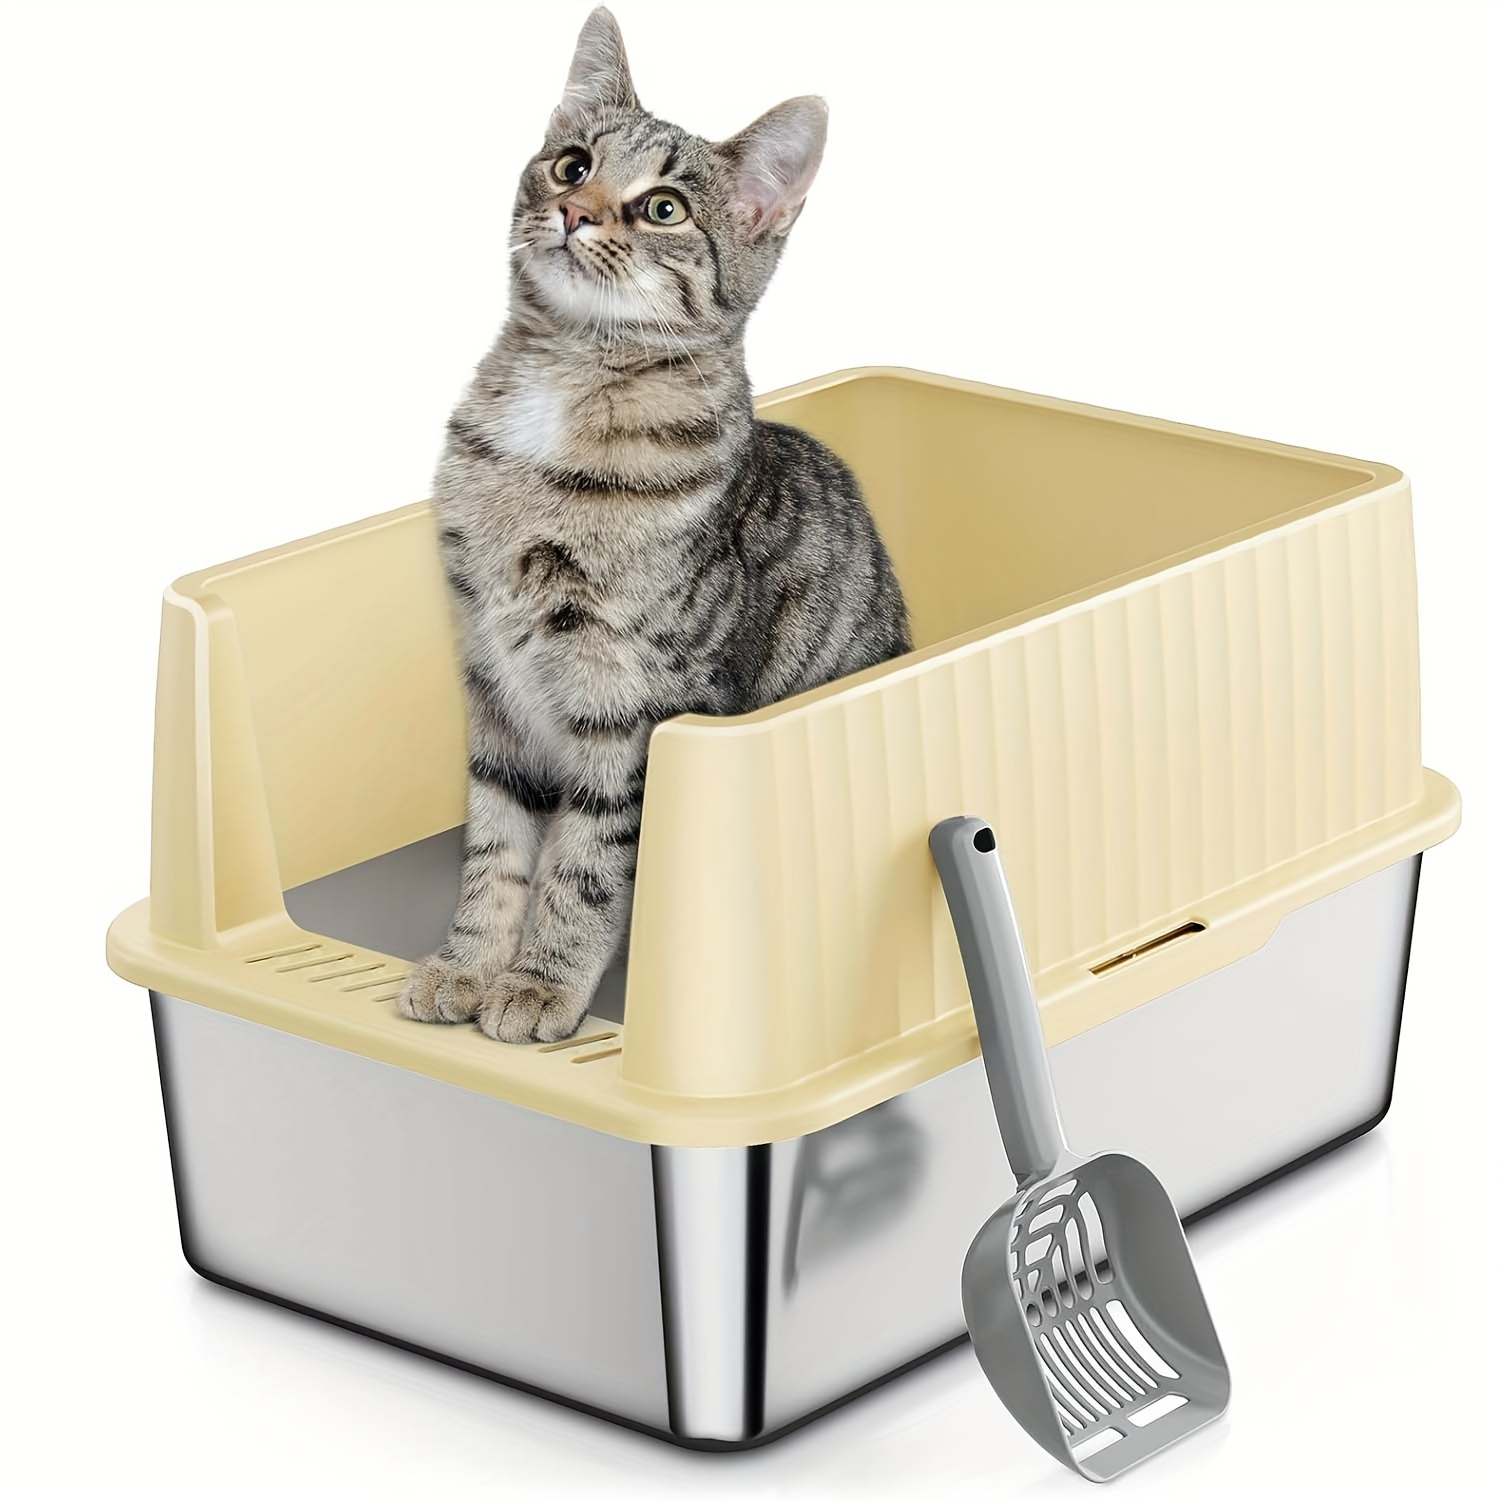 

Stainless Steel Litter Box, Cat Litter Box, Kitten Litter Box - 17.3" L X 13.3" W X 11.8" H - High Sided - Easy To Clean, Leak-proof, Non-stick, Odor-reducing, Metal Litter Box For Small Cats